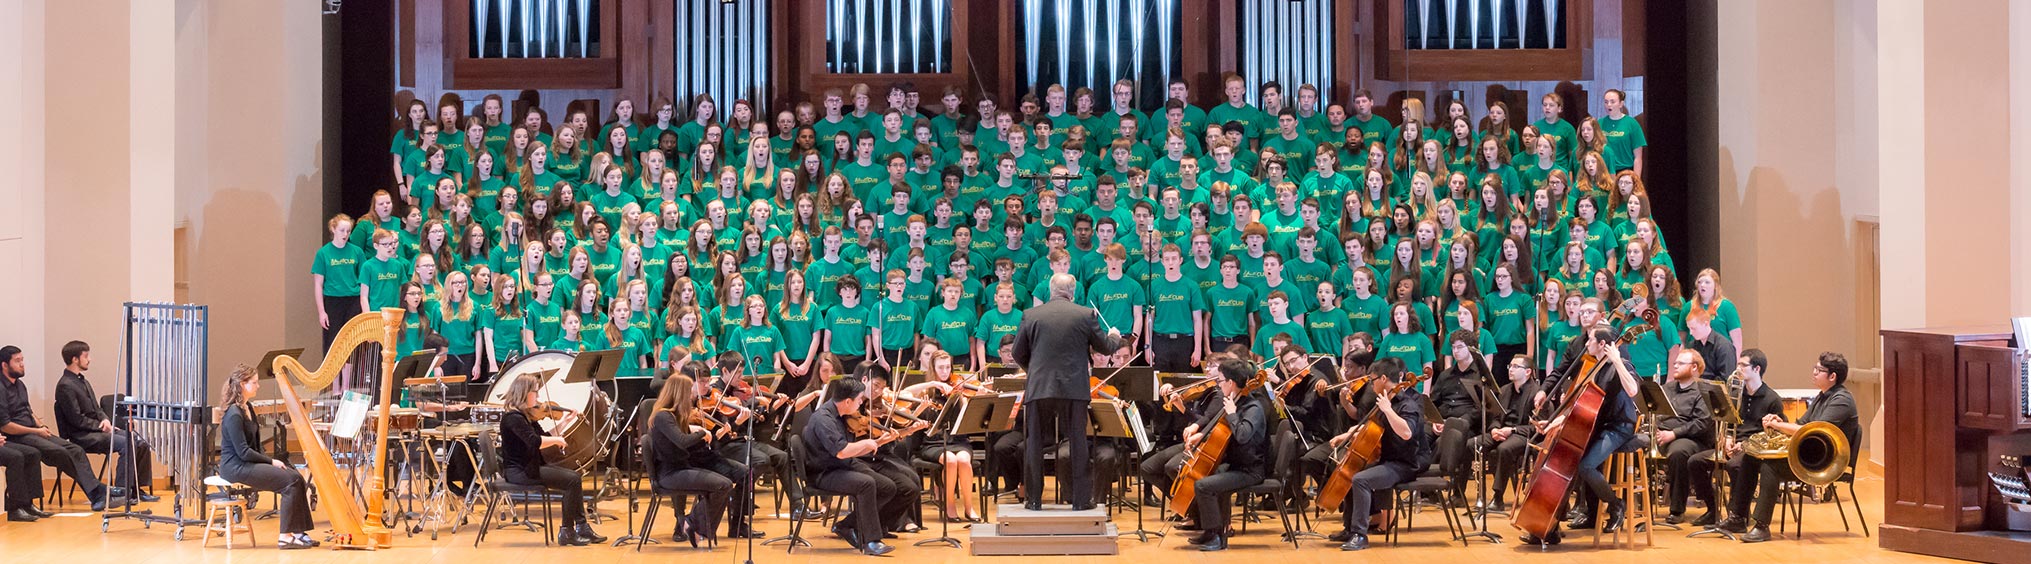 Eighteen choirs with 352 students converge for YouthCUE Baylor Festival 12